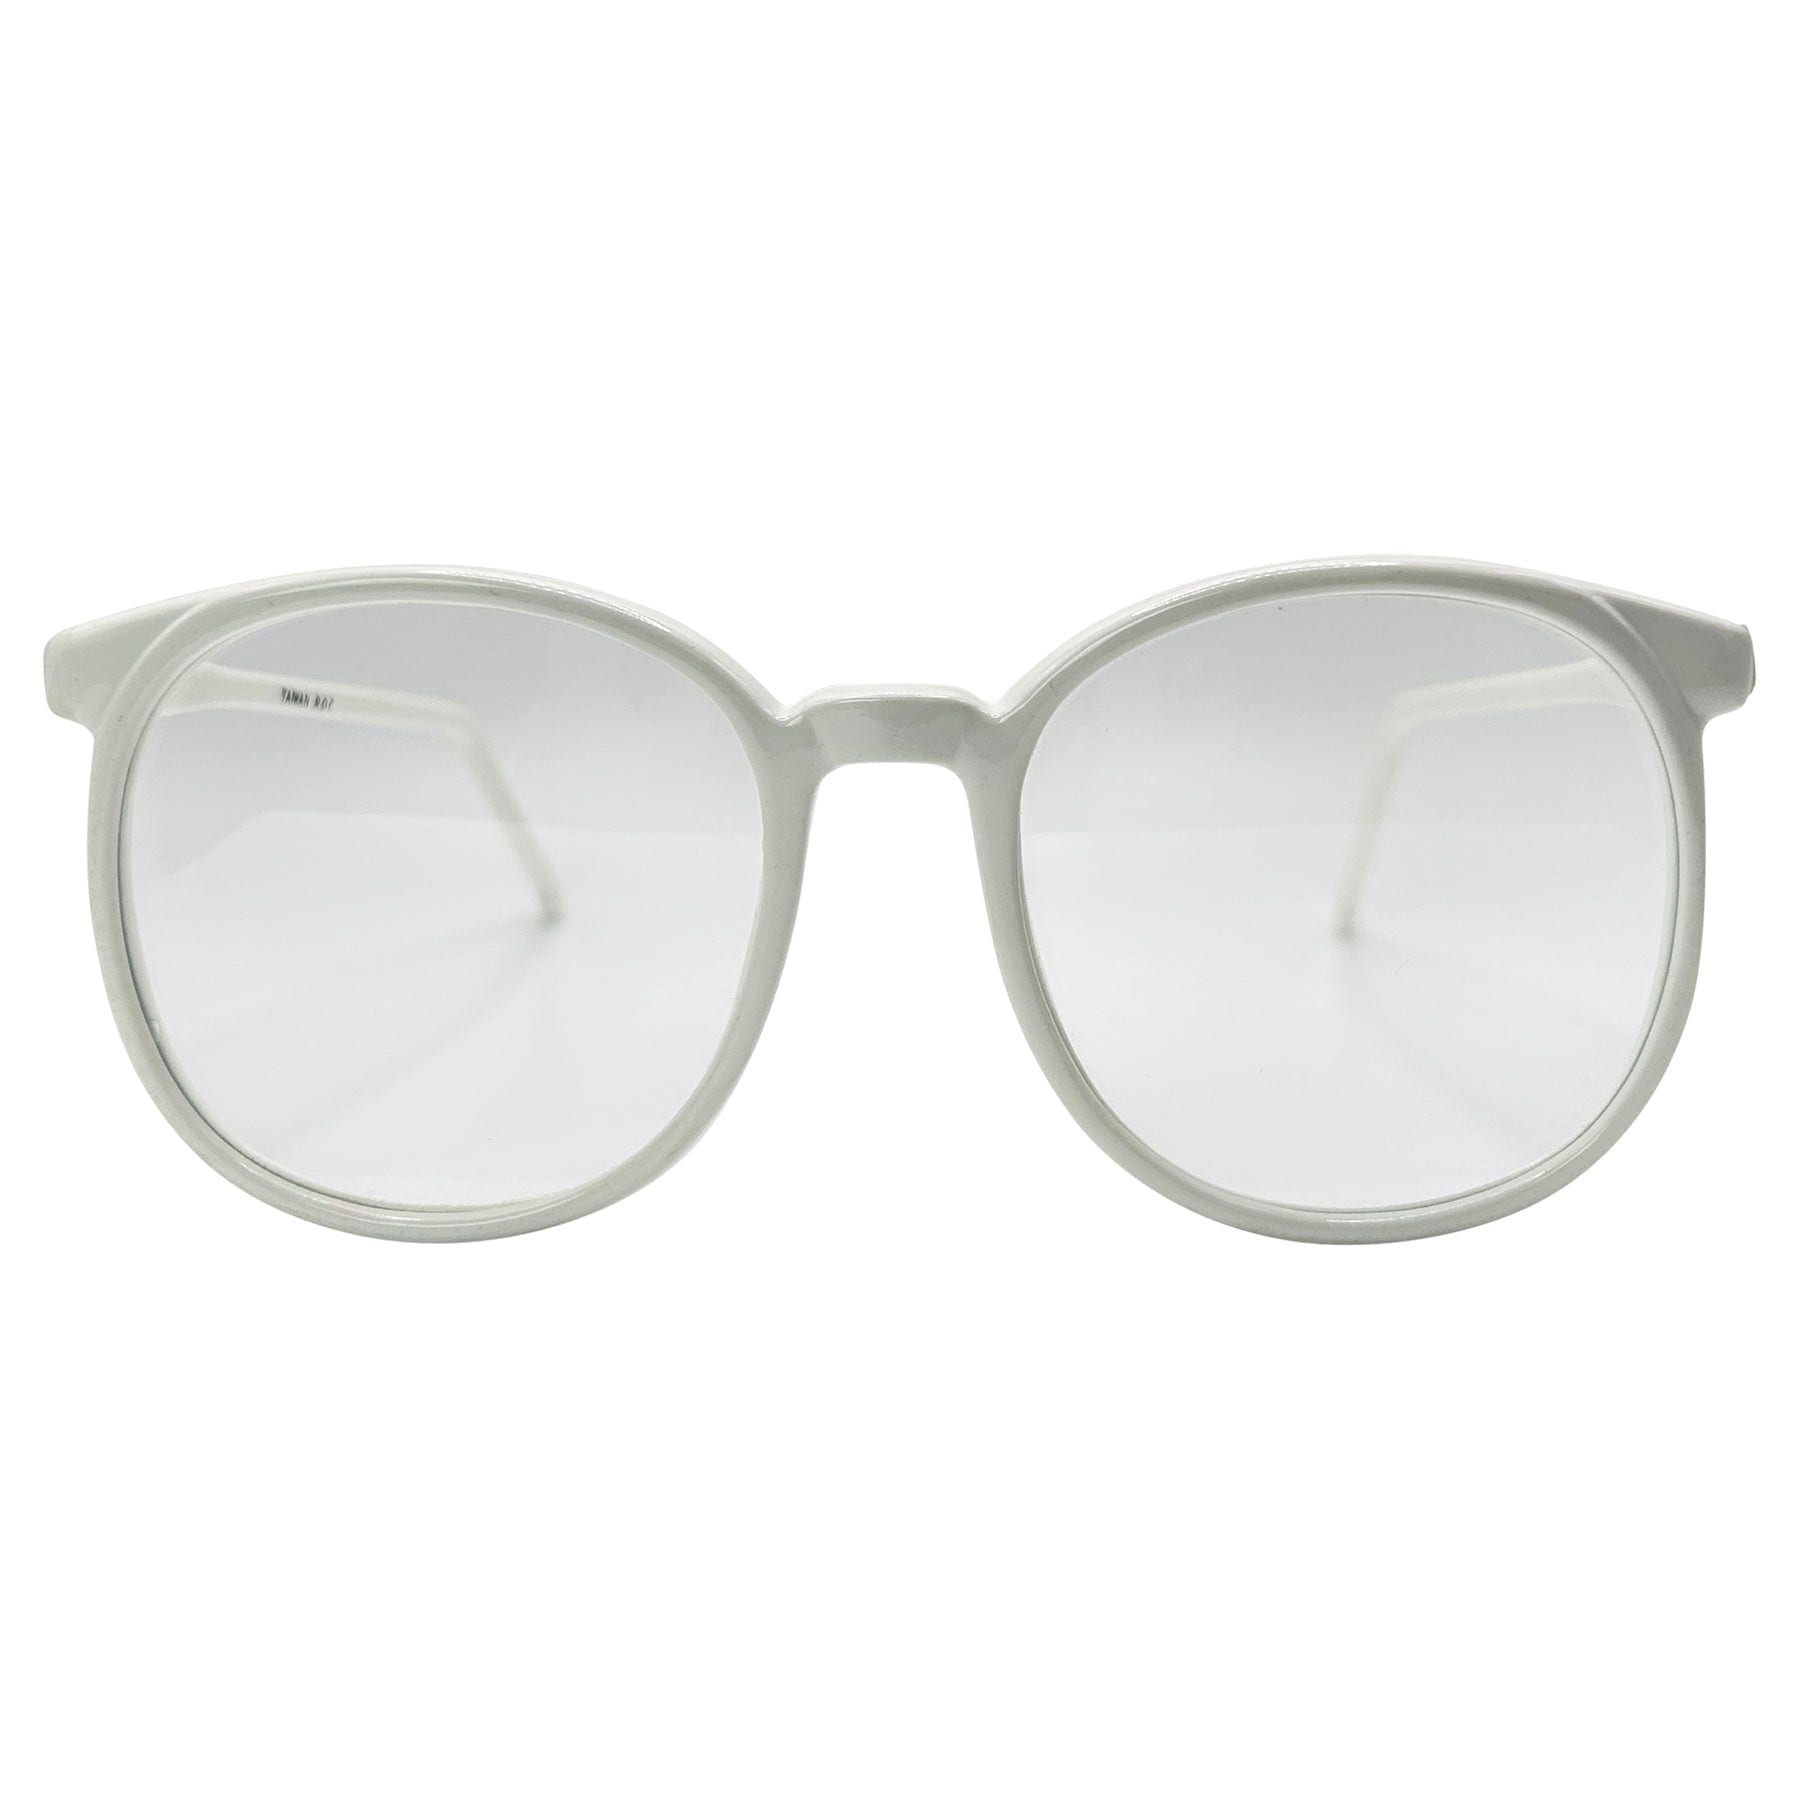 white vintage glasses with a round shaped frame